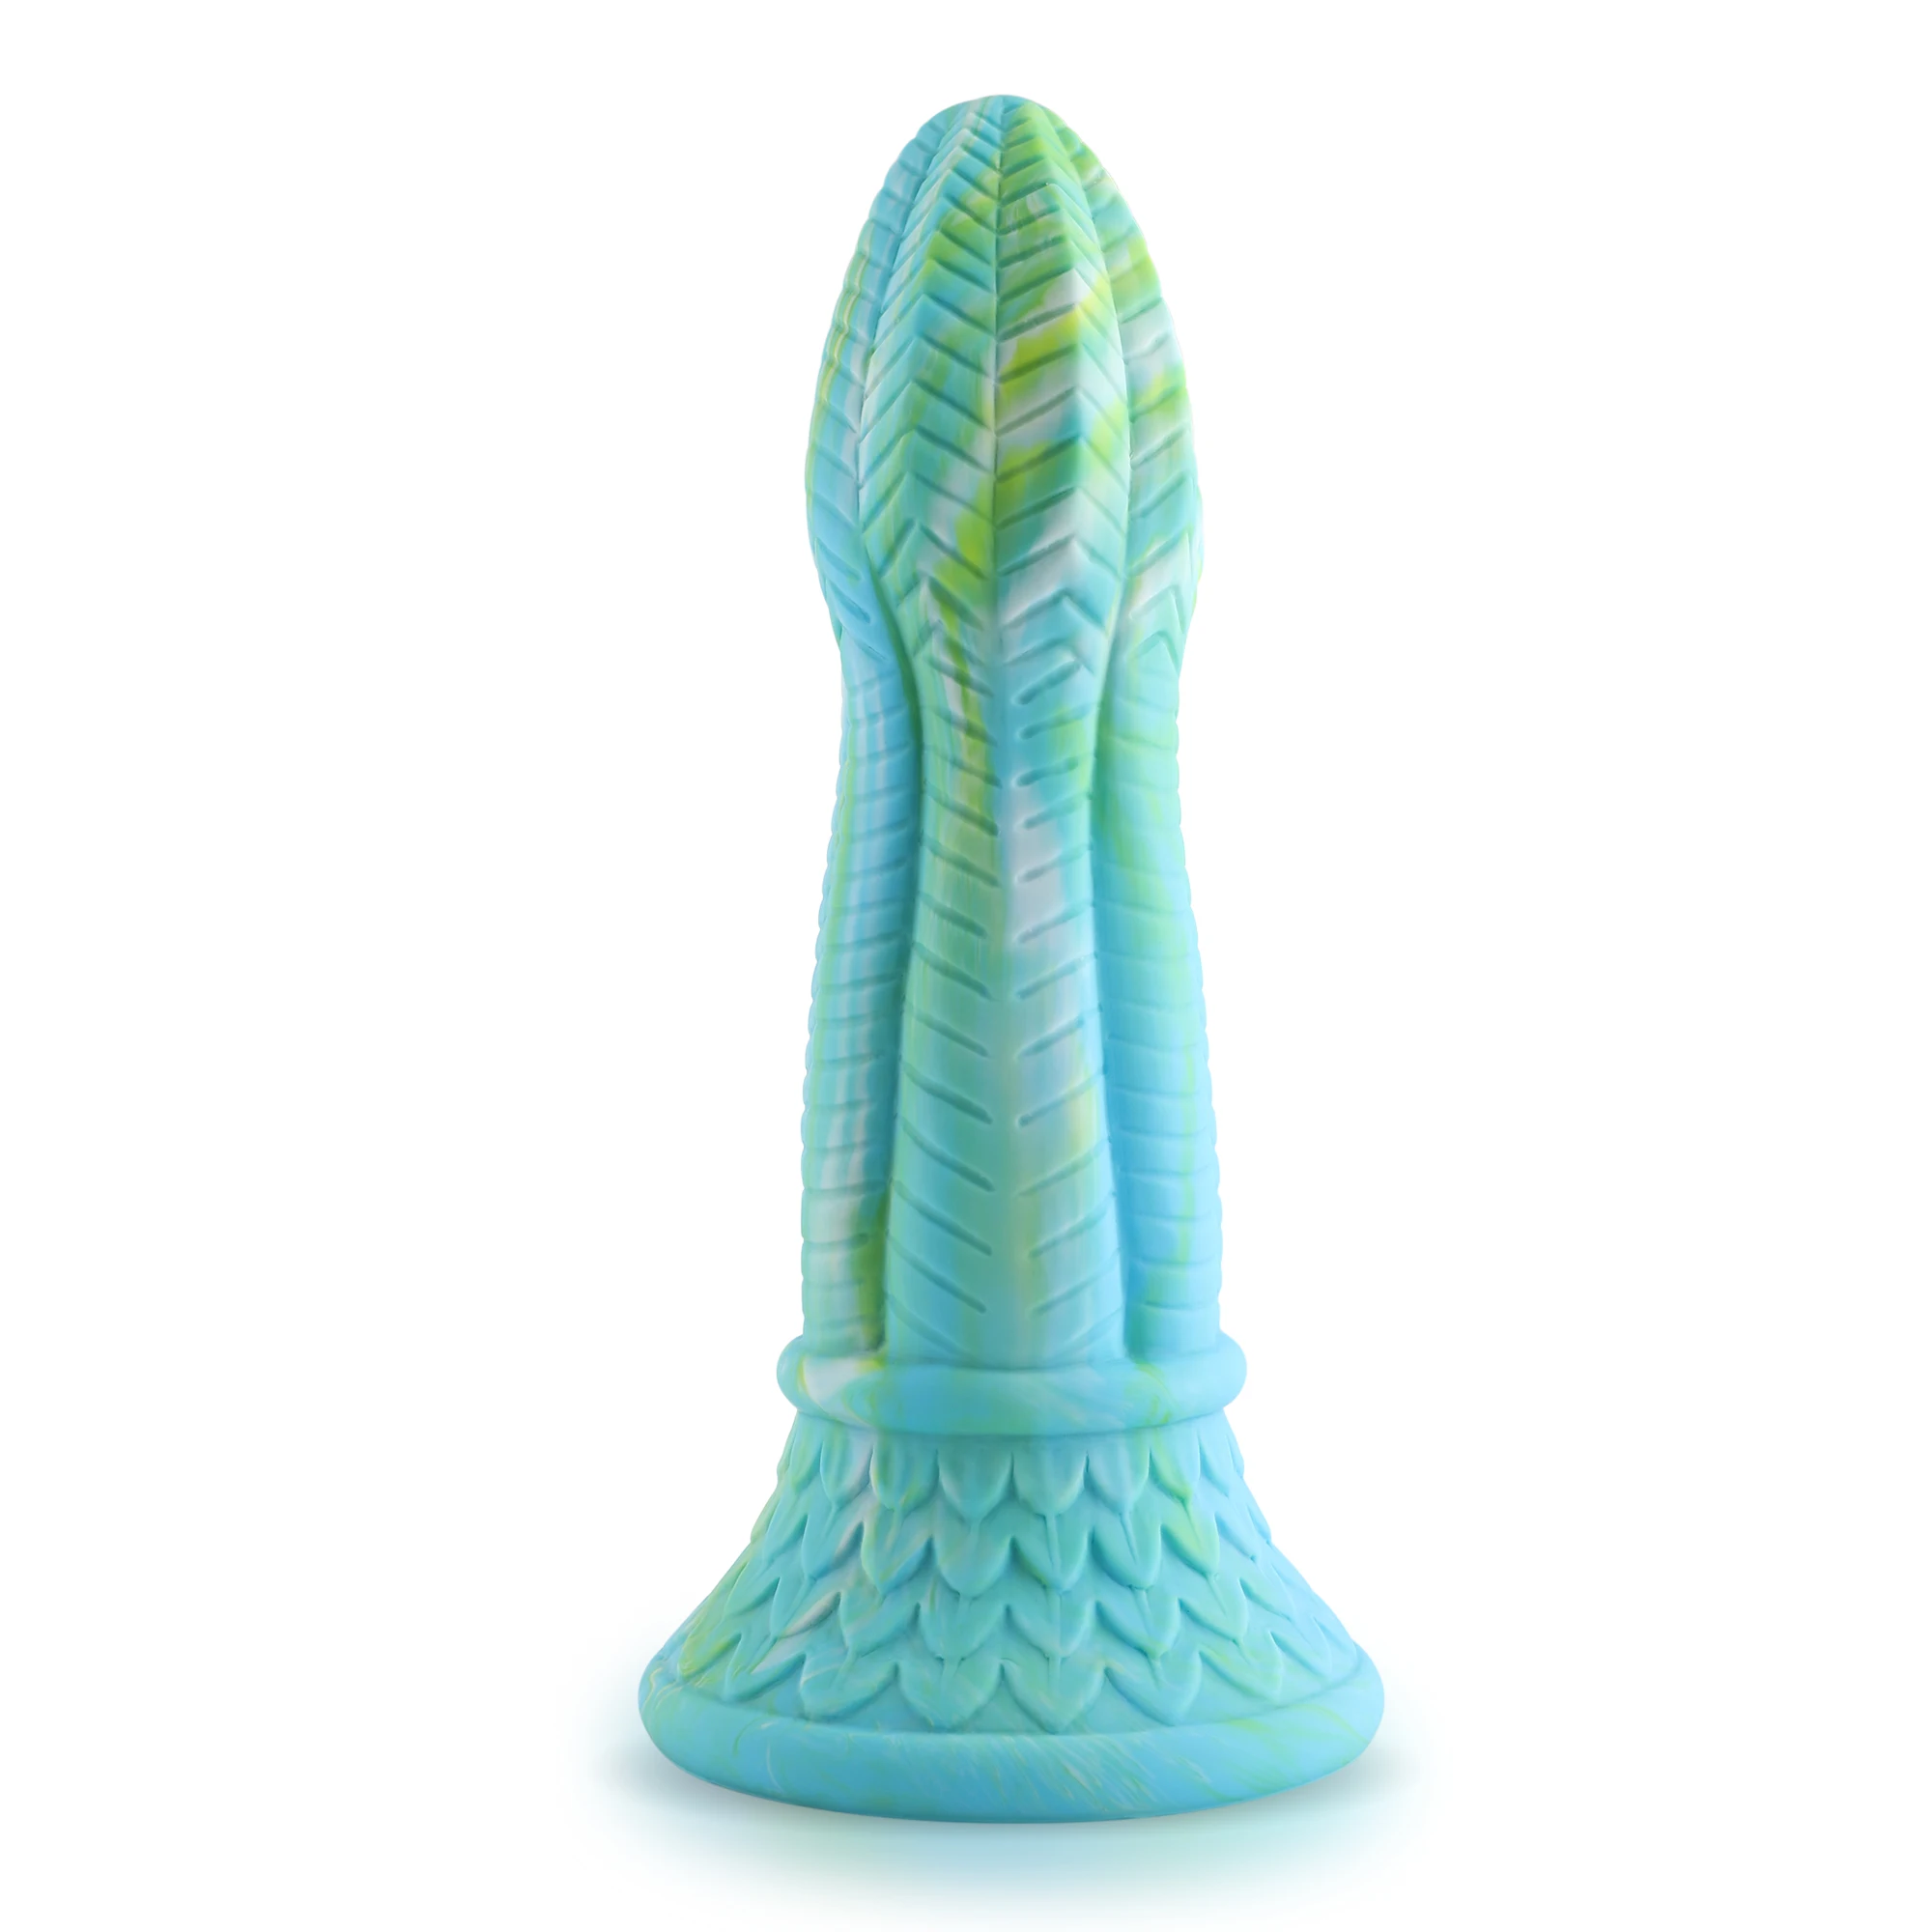 Hismith 10.3 Inch Silicone Dildo Monster Series Green Snake Mold Penis KlicLok System Sex Machine Accessories